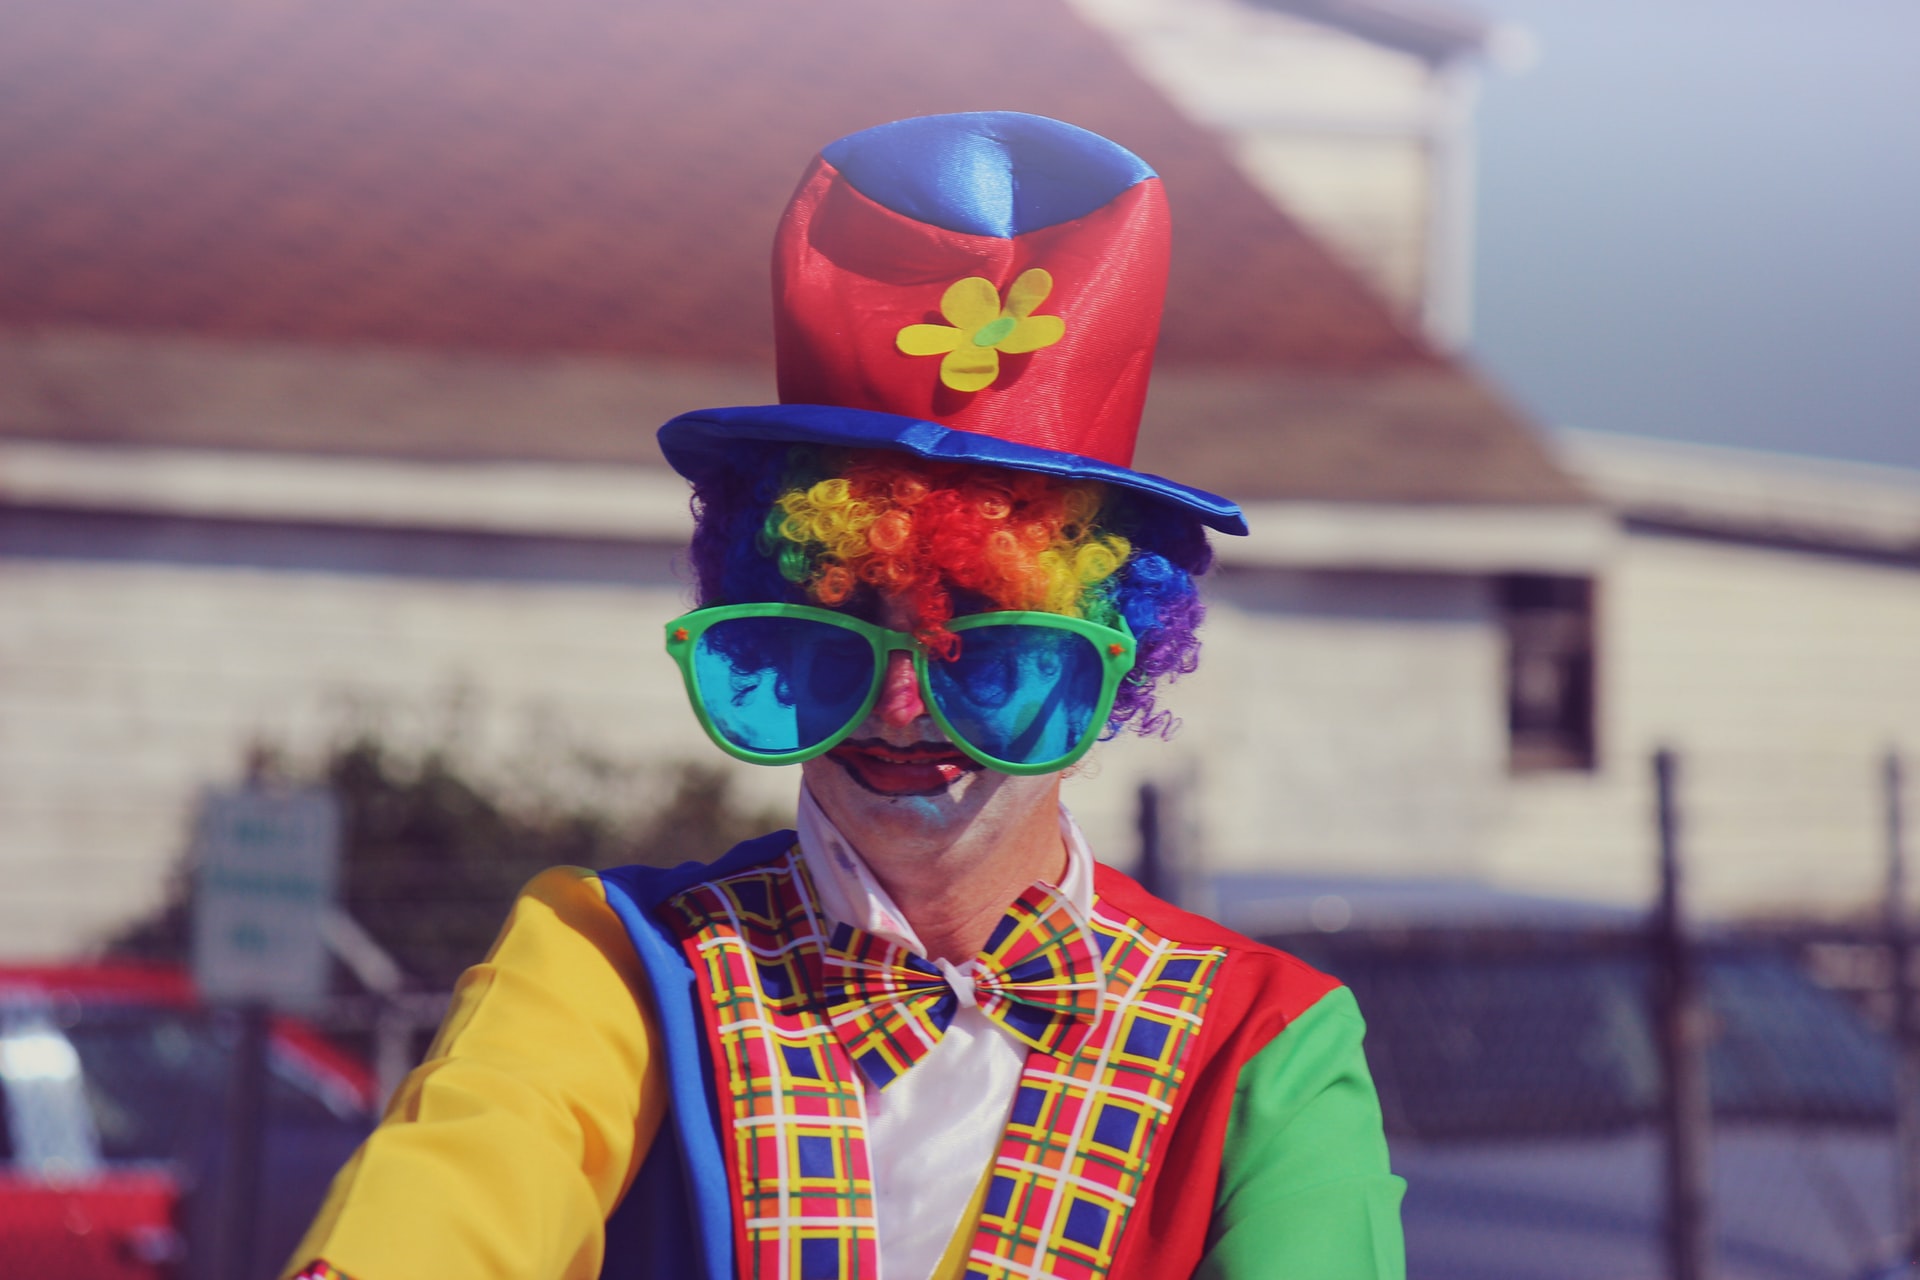 Man Being Fired Brings Emotional Support Clown to Meeting